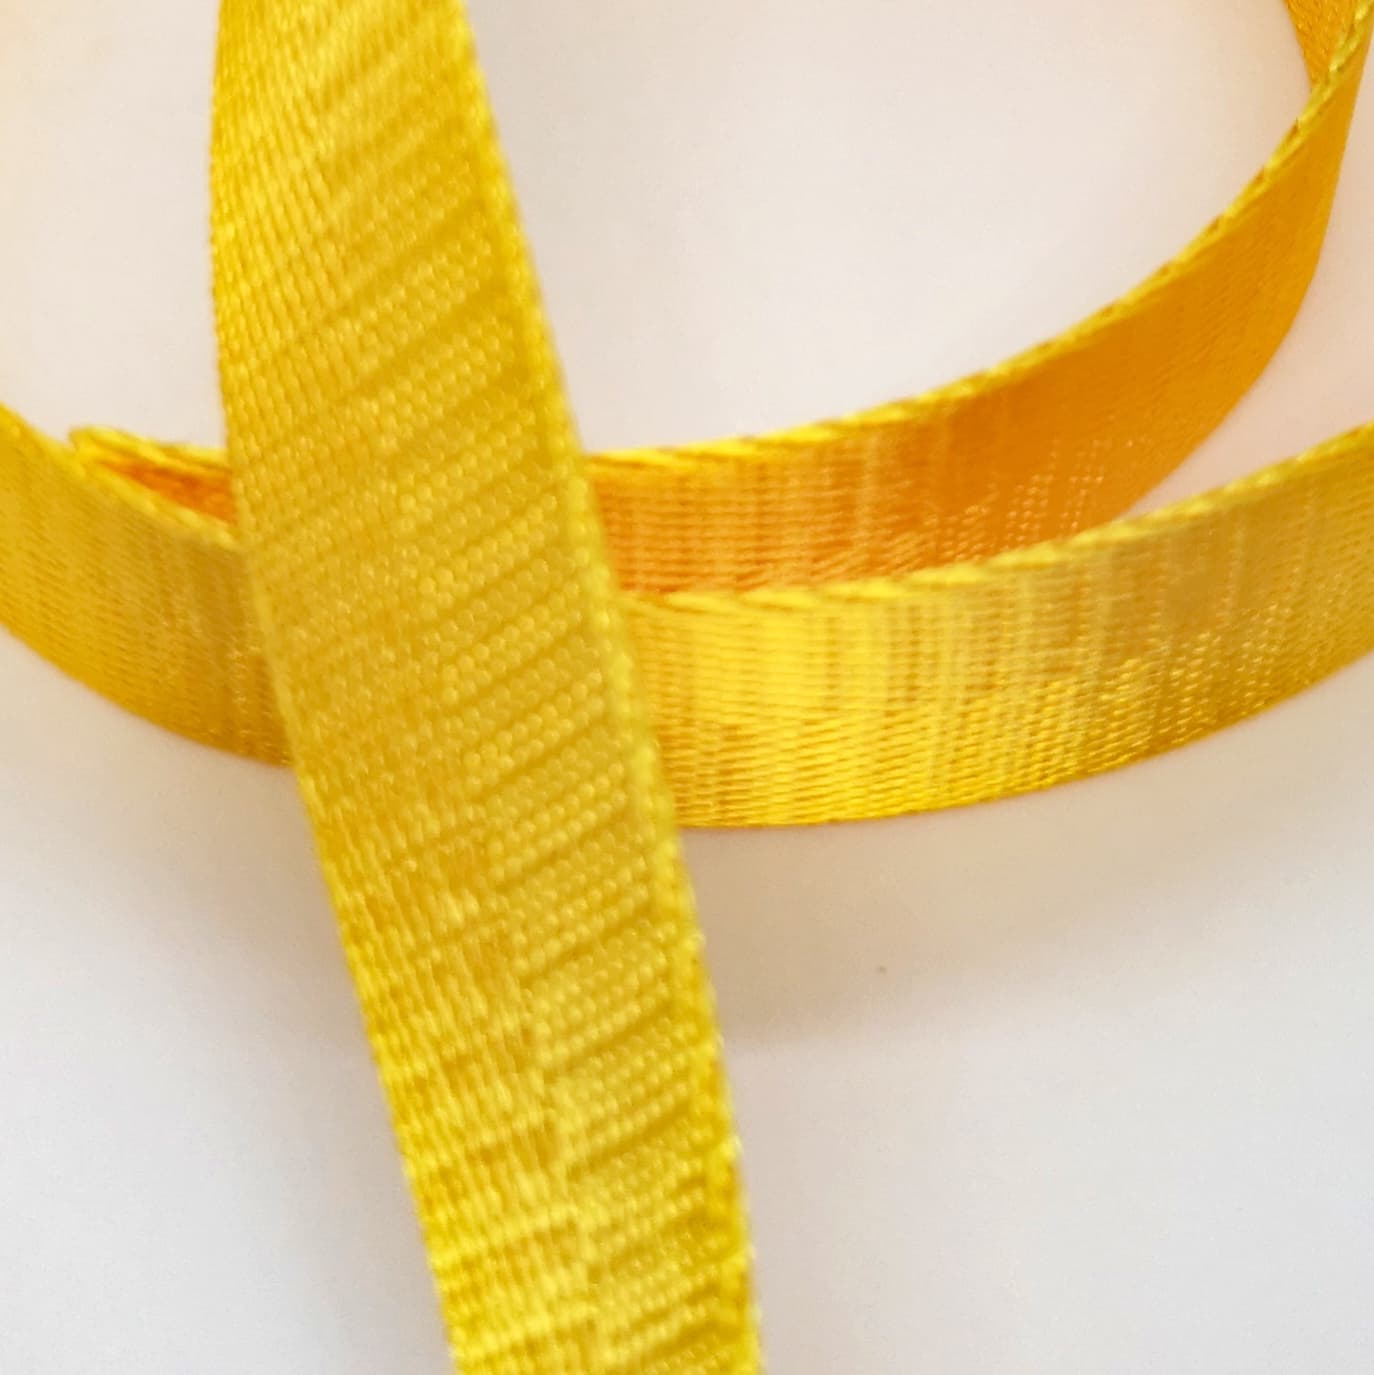 1" Wide Webbing -Solid Color - SUNSHINE YELLOW